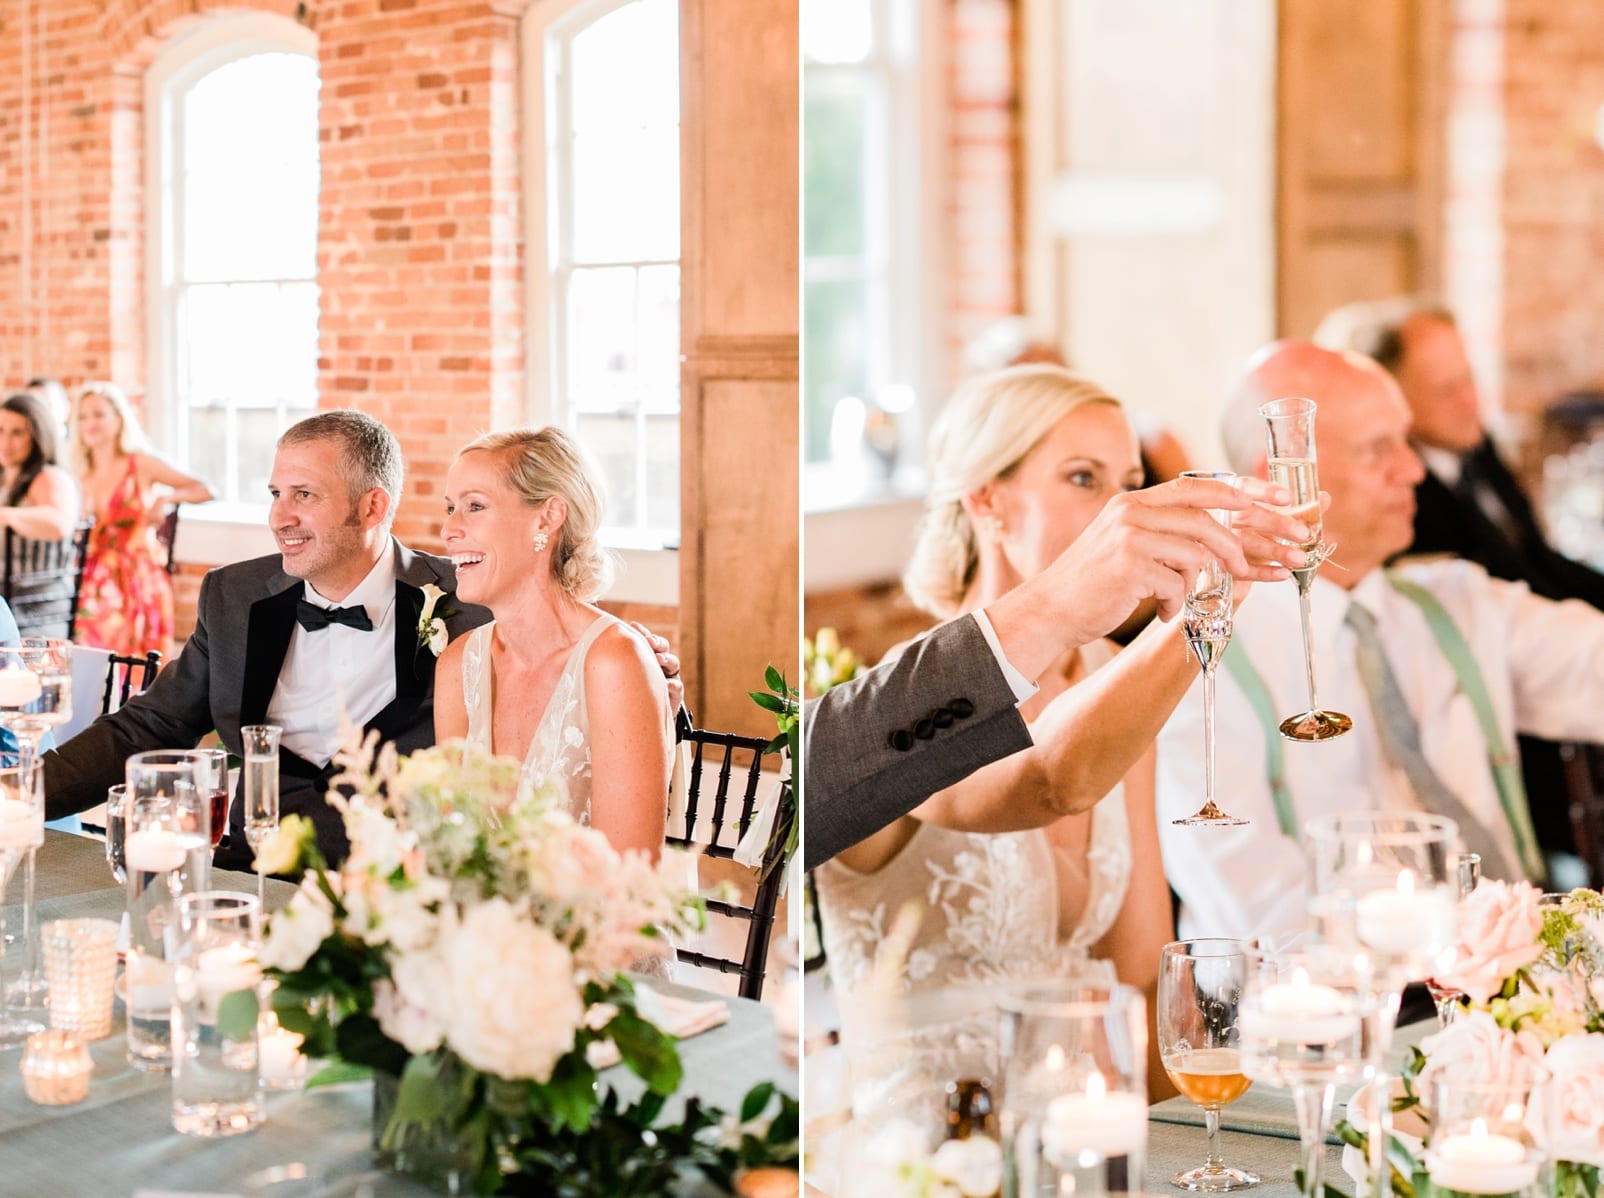 Raleigh bride and groom toasting during indoor wedding reception with exposed red brick walls photo